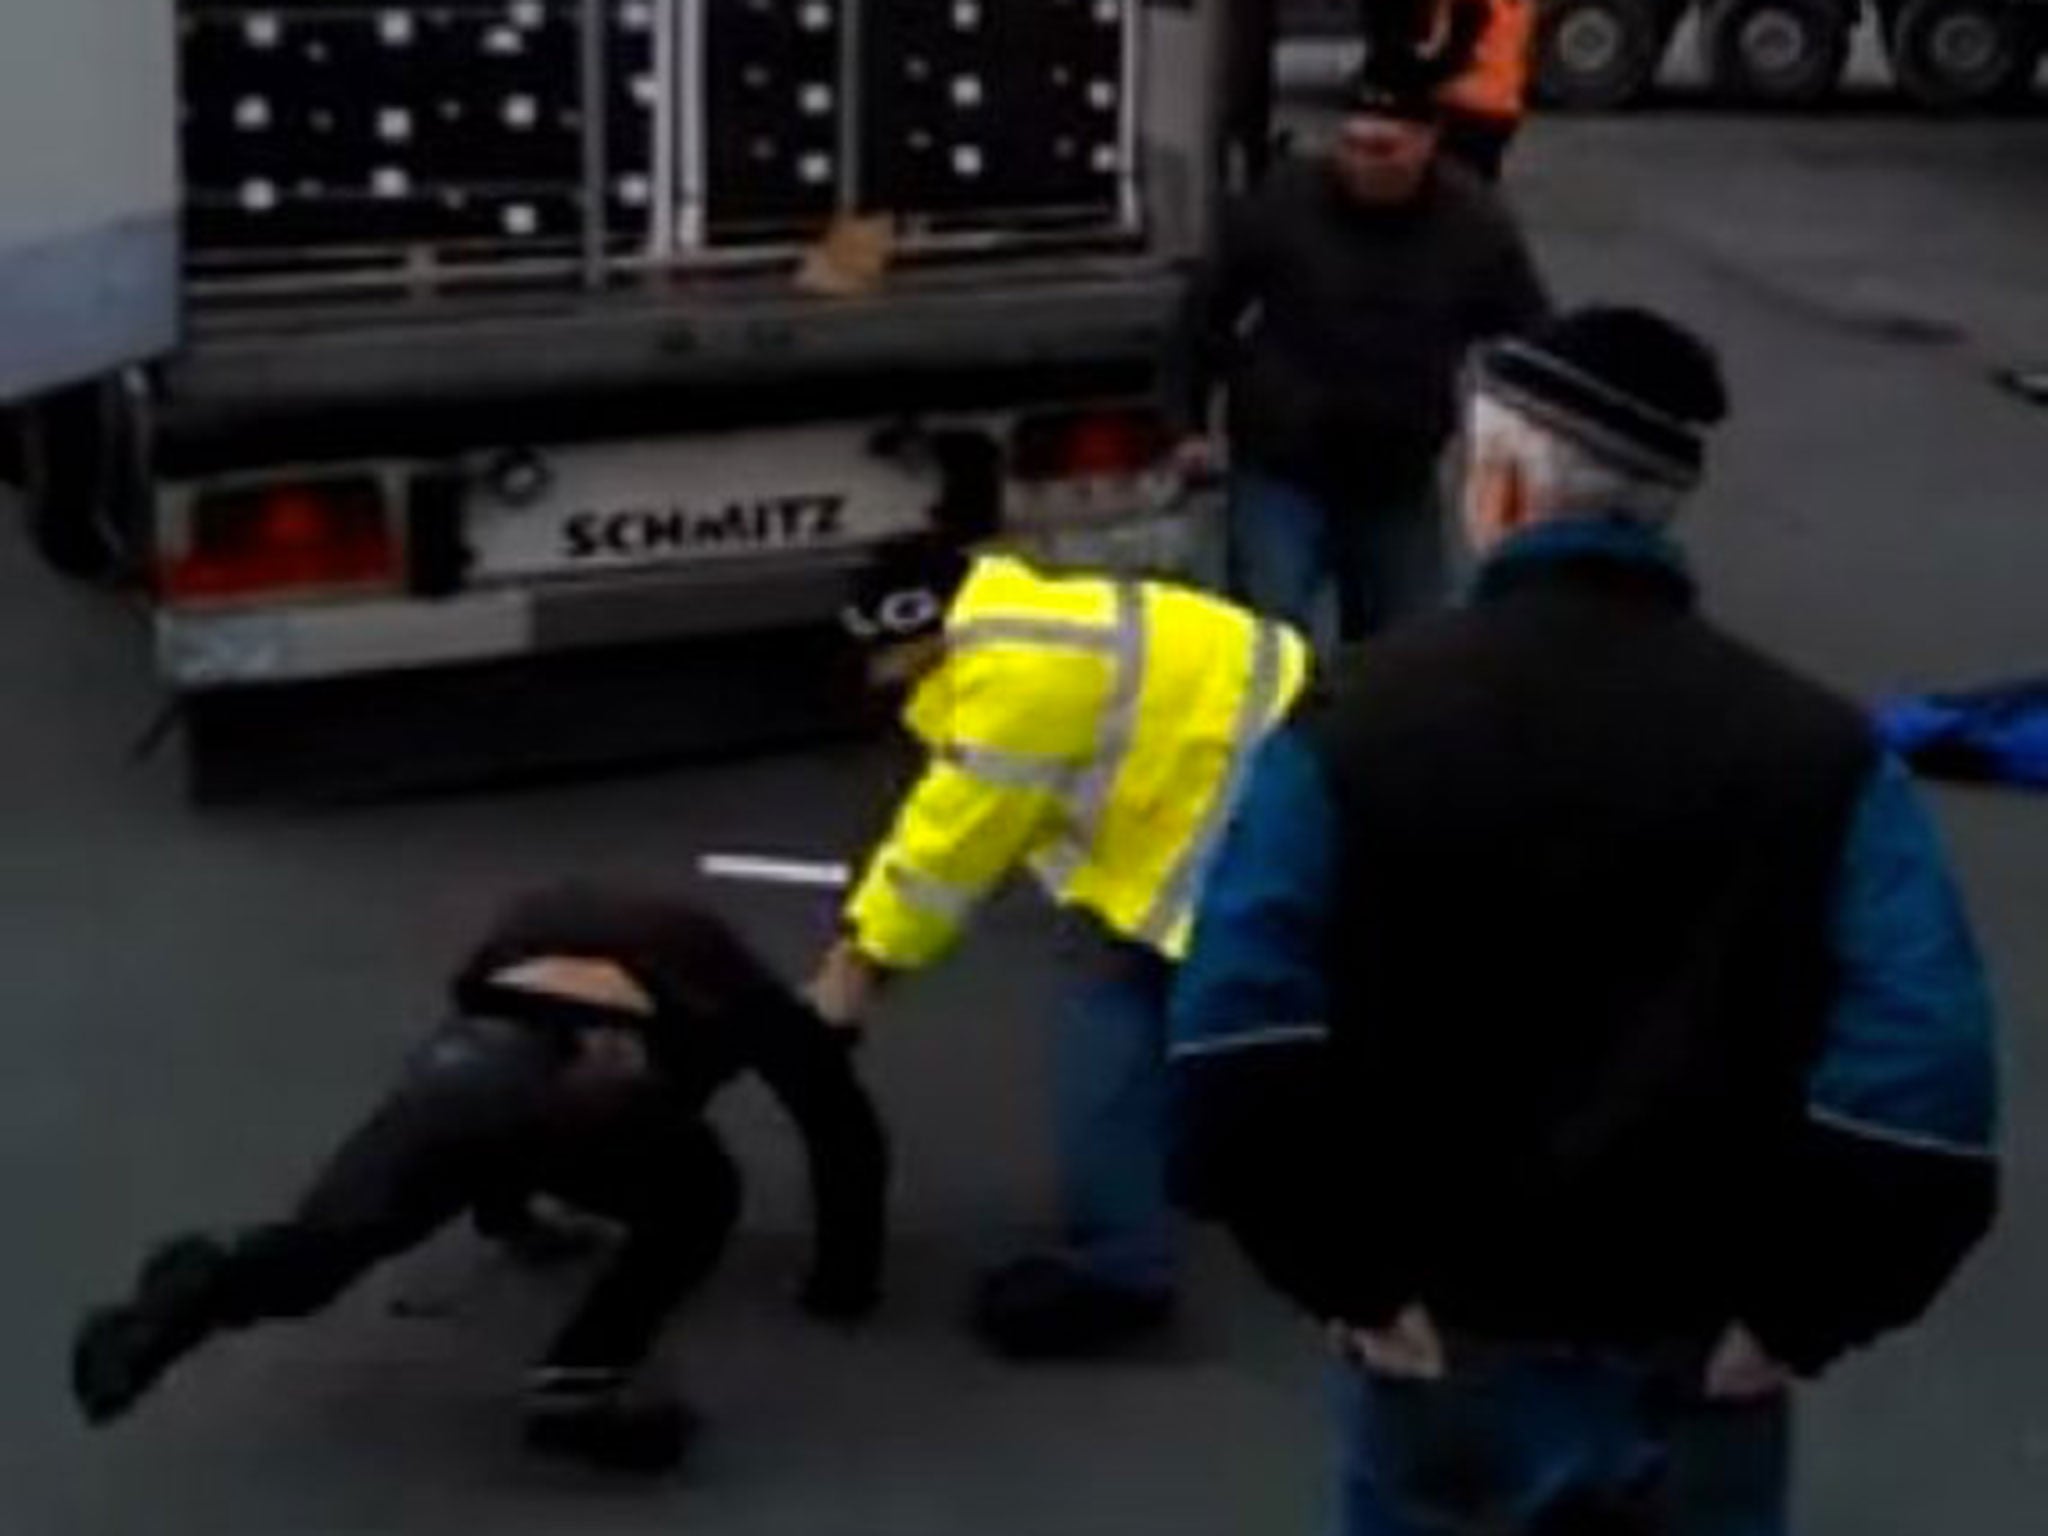 The video saw the man in the yellow jacket kick and punch those men pulled out of the lorry